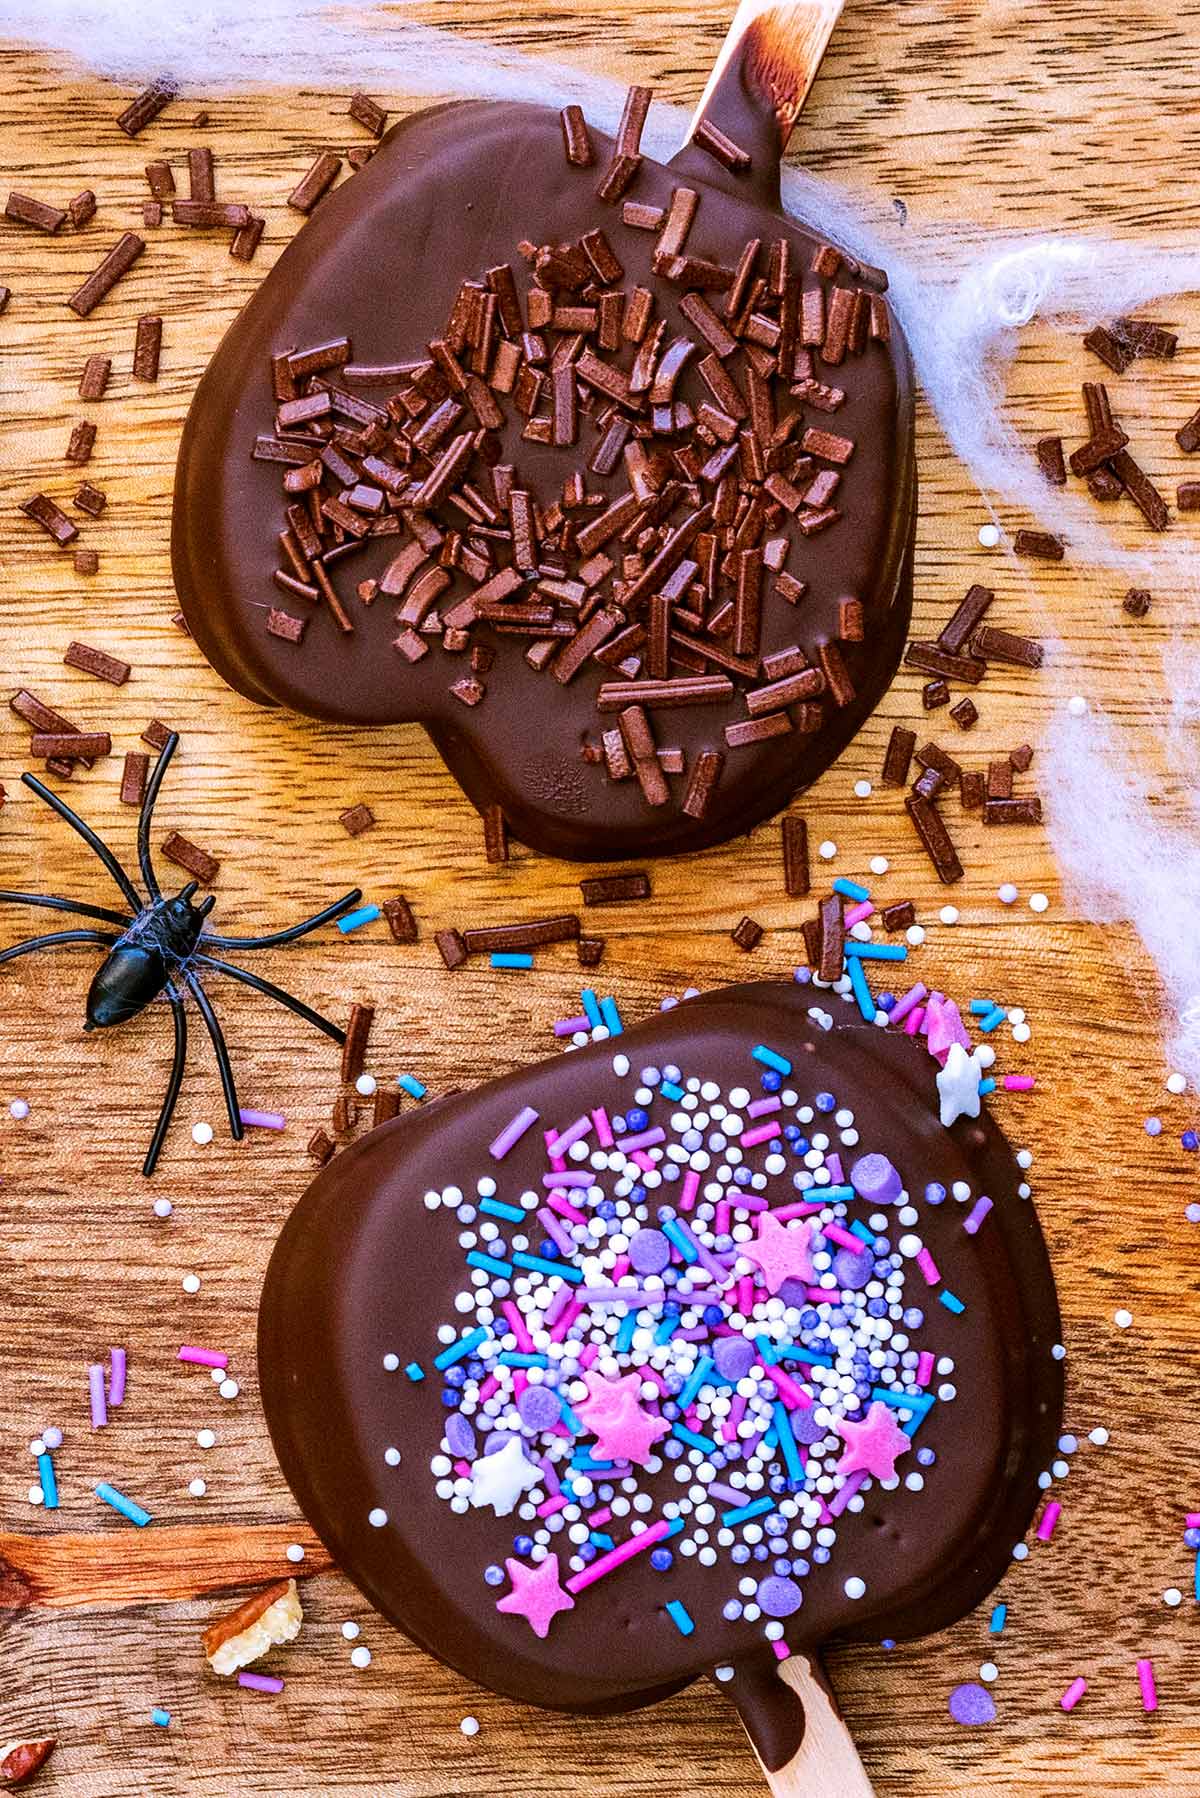 Two chocolate coated apple slices decorated with sprinkles.